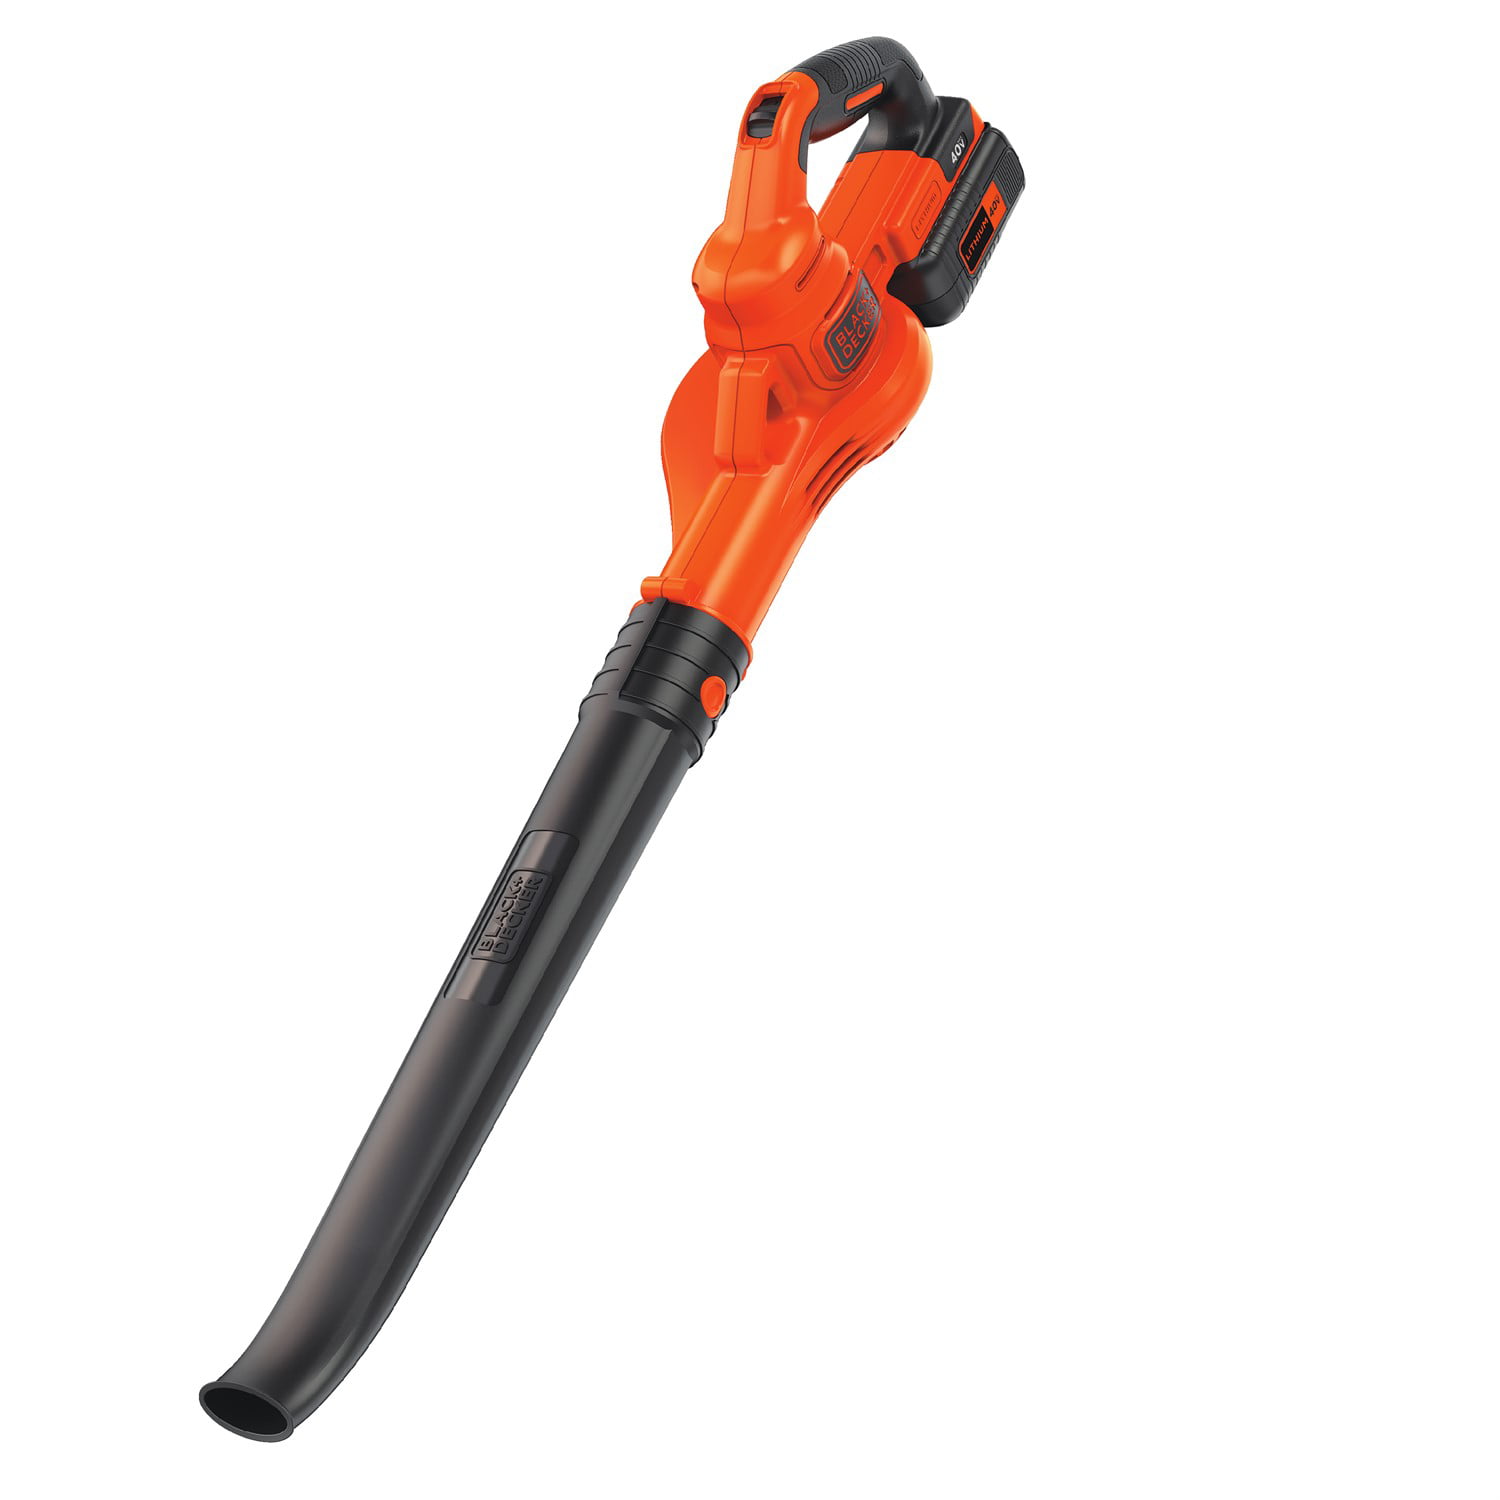 Black & Decker 18V Single Source Chainsaw Style Trimmer - Bunting